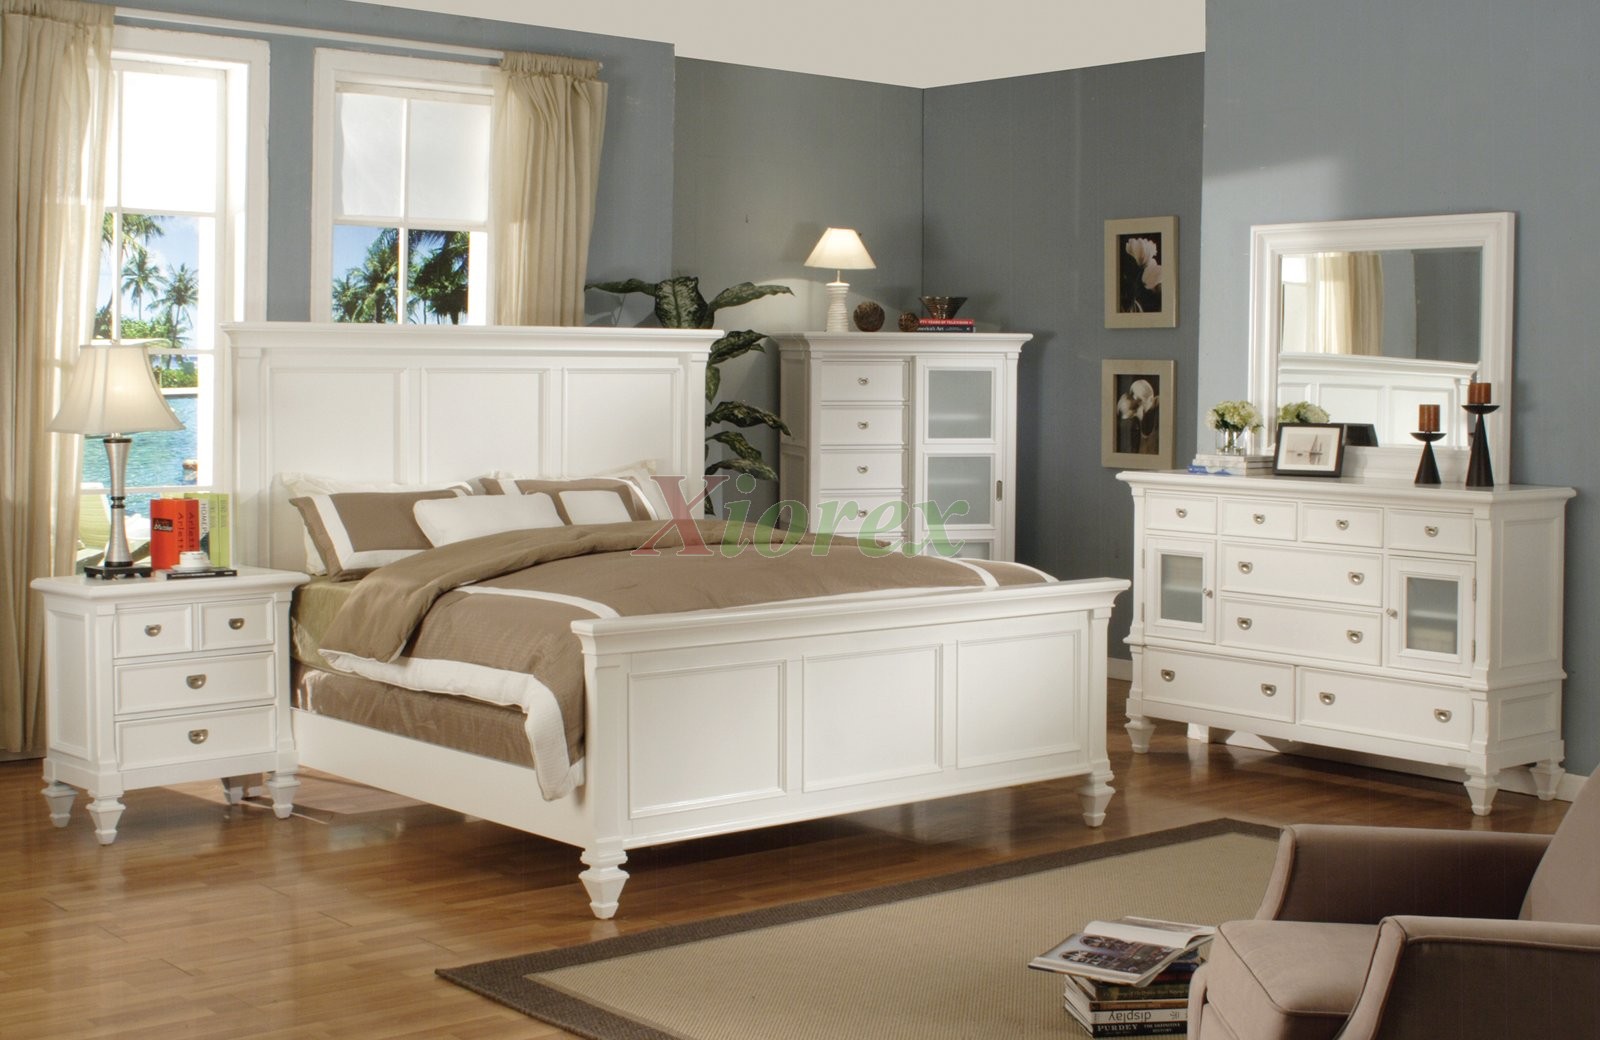 White Bedroom Set with Tall Headboard King and Queen Beds 126 | Xiorex;  Black Bedroom Furniture